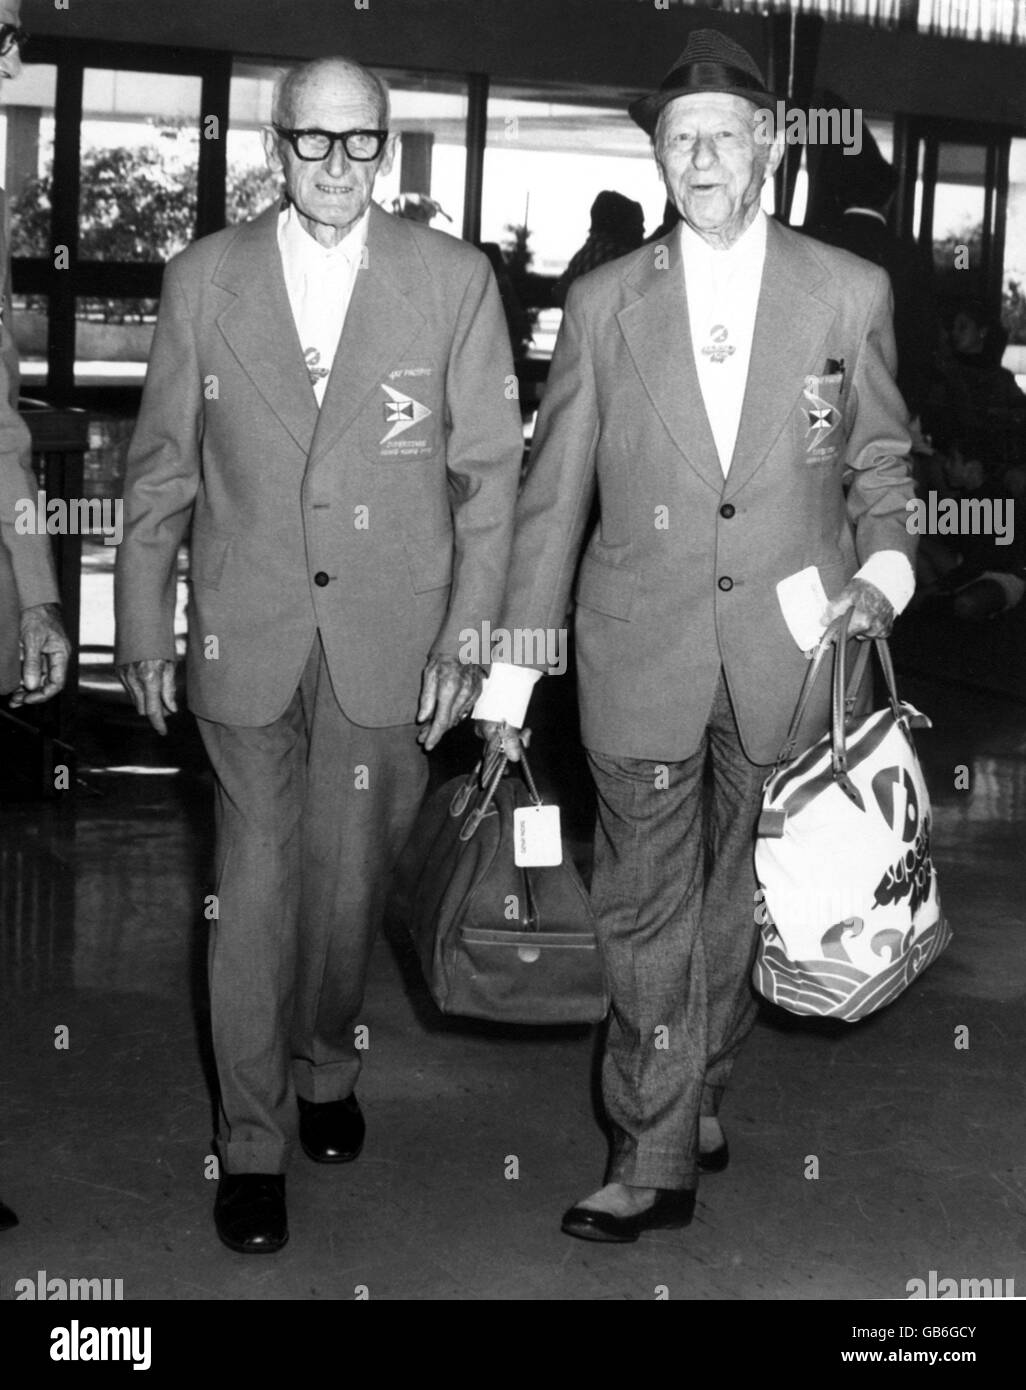 (L-R) Former Test cricketers Harold Larwood and Bert Oldfield, part of the Australian Superstars party, on their arrival at the airport Stock Photo